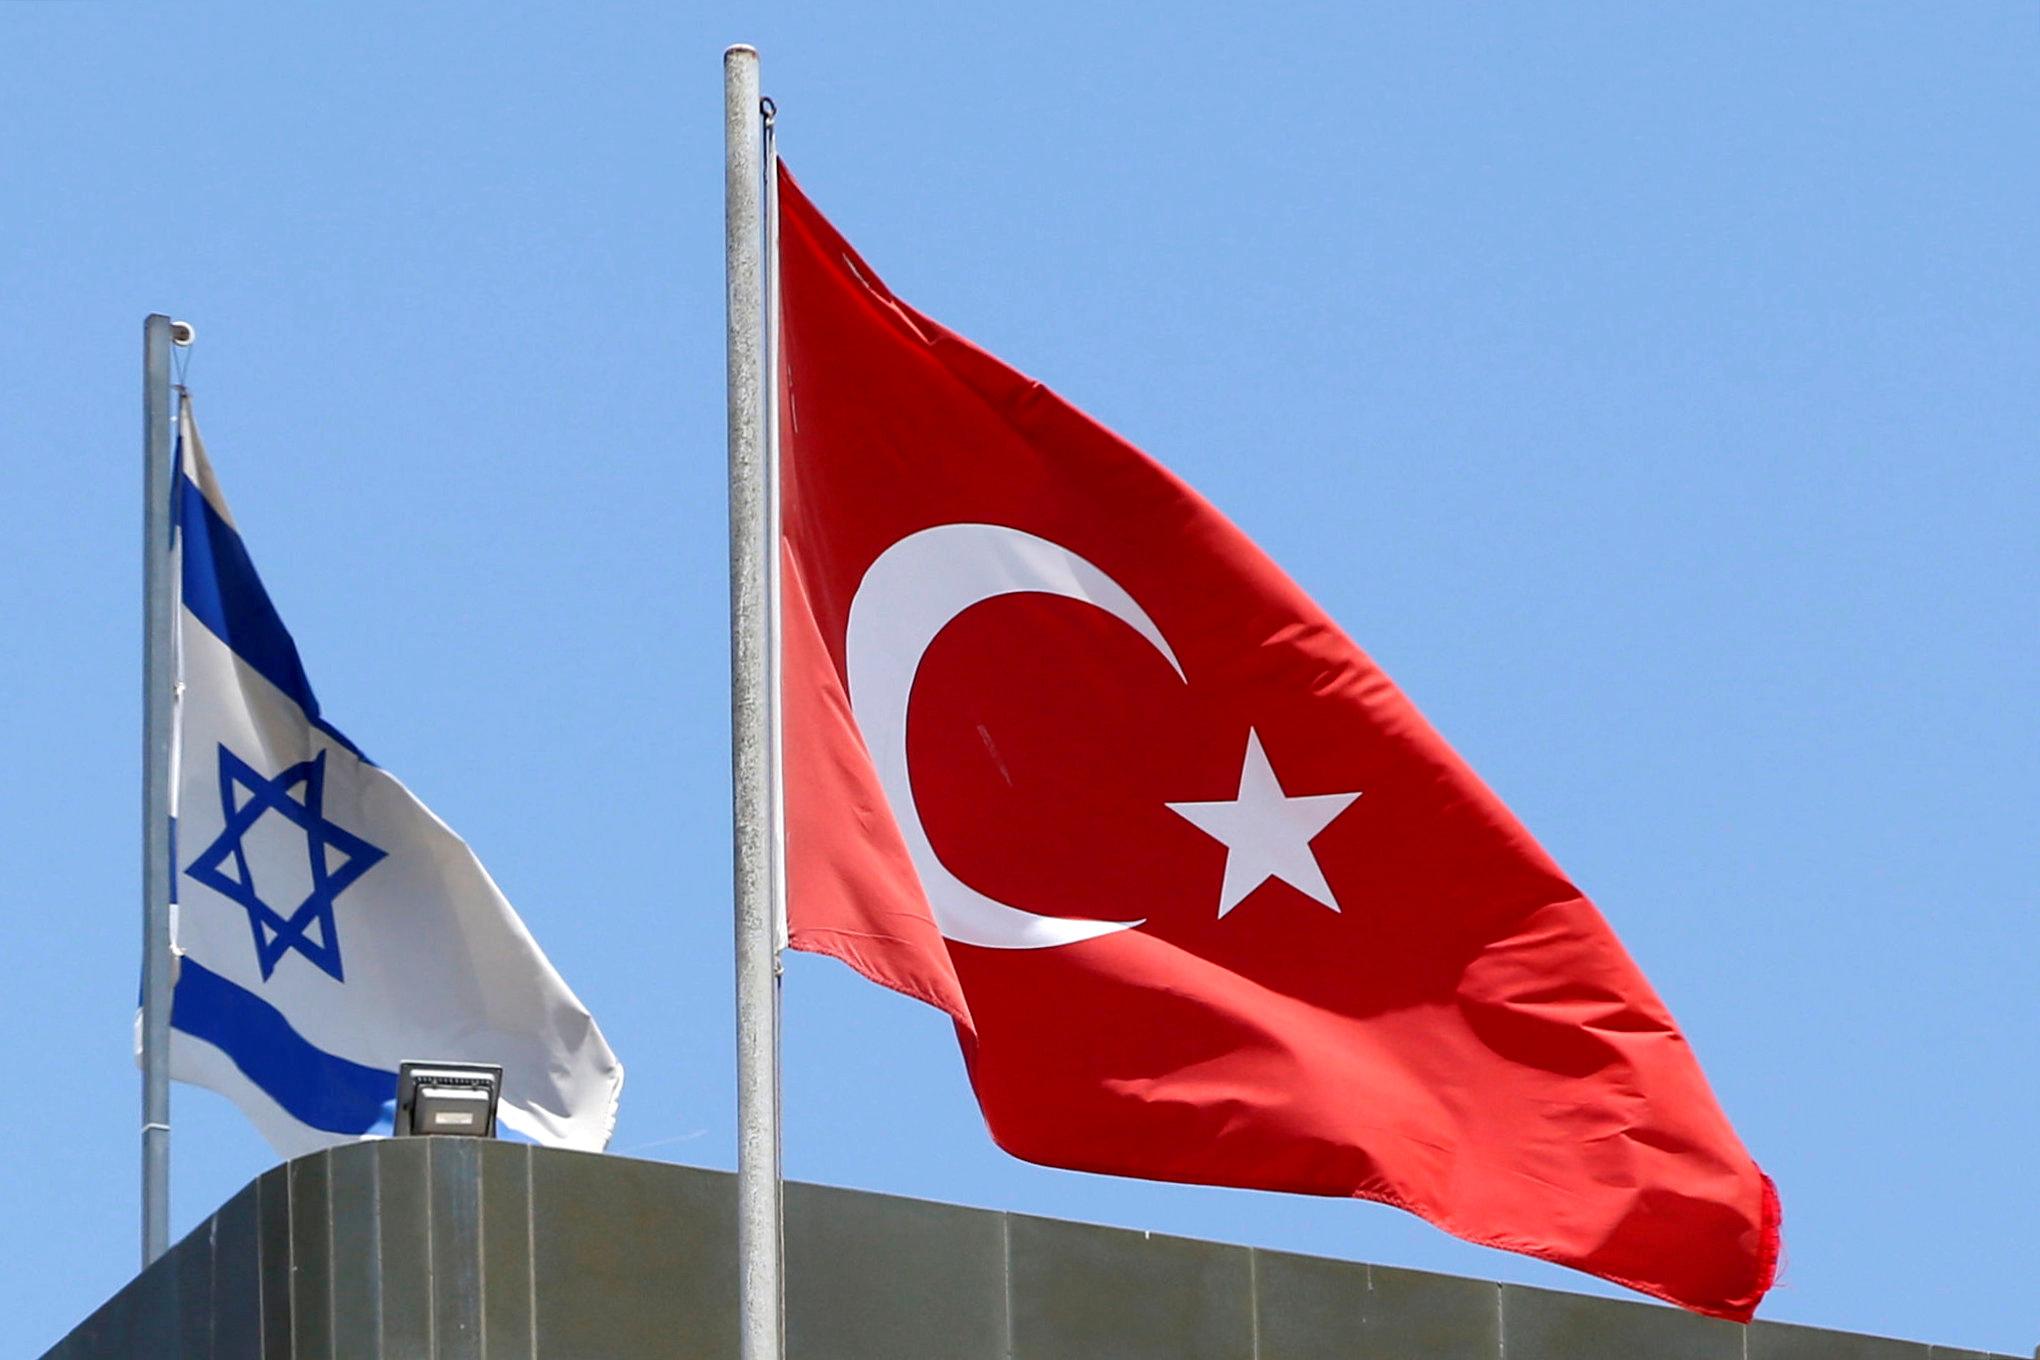 Flags of Israel and Turkey